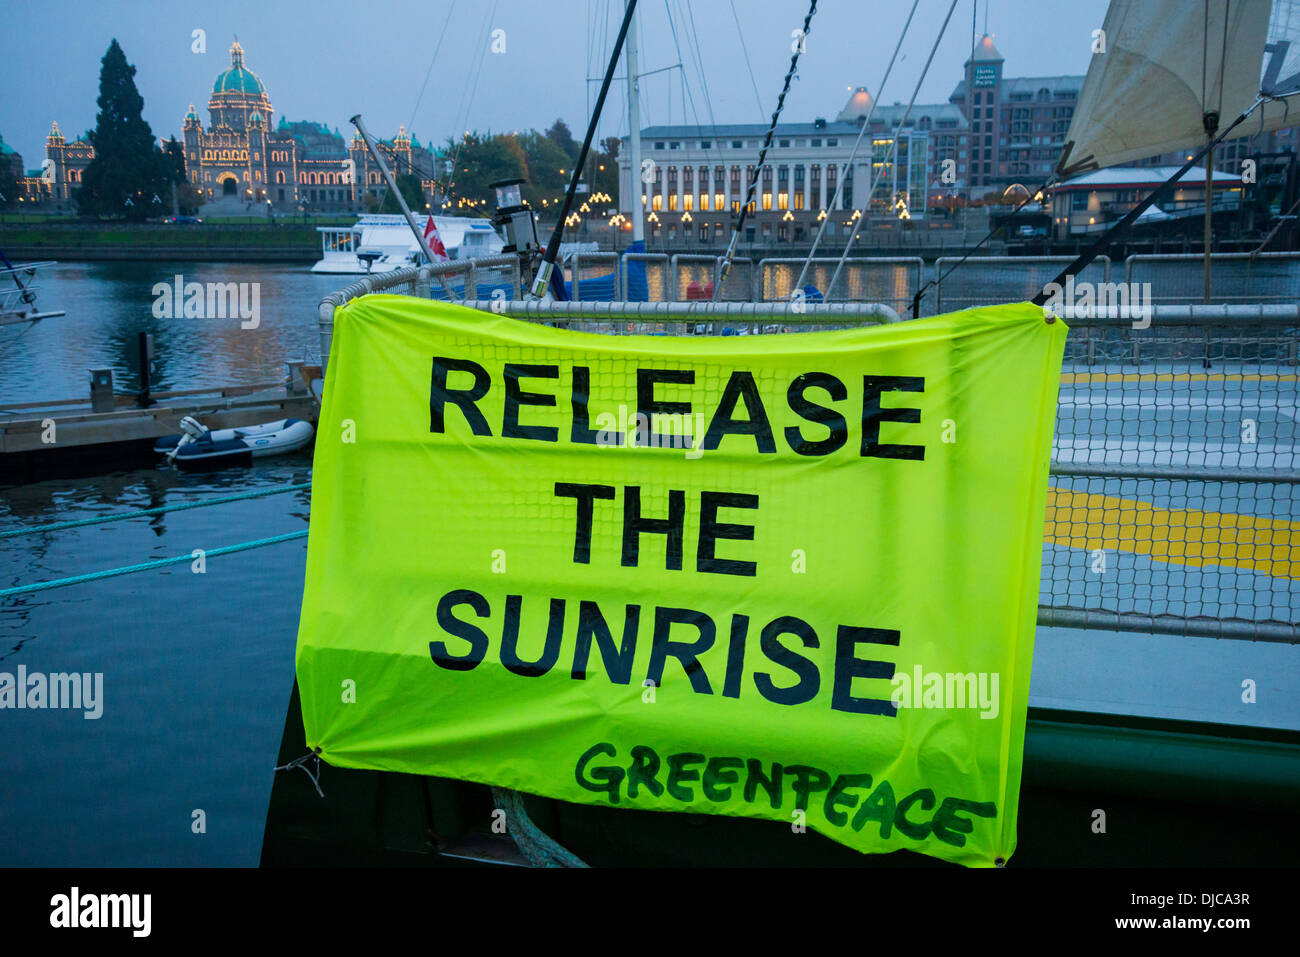 Greanpeace banner, Release the sunrise. Stock Photo